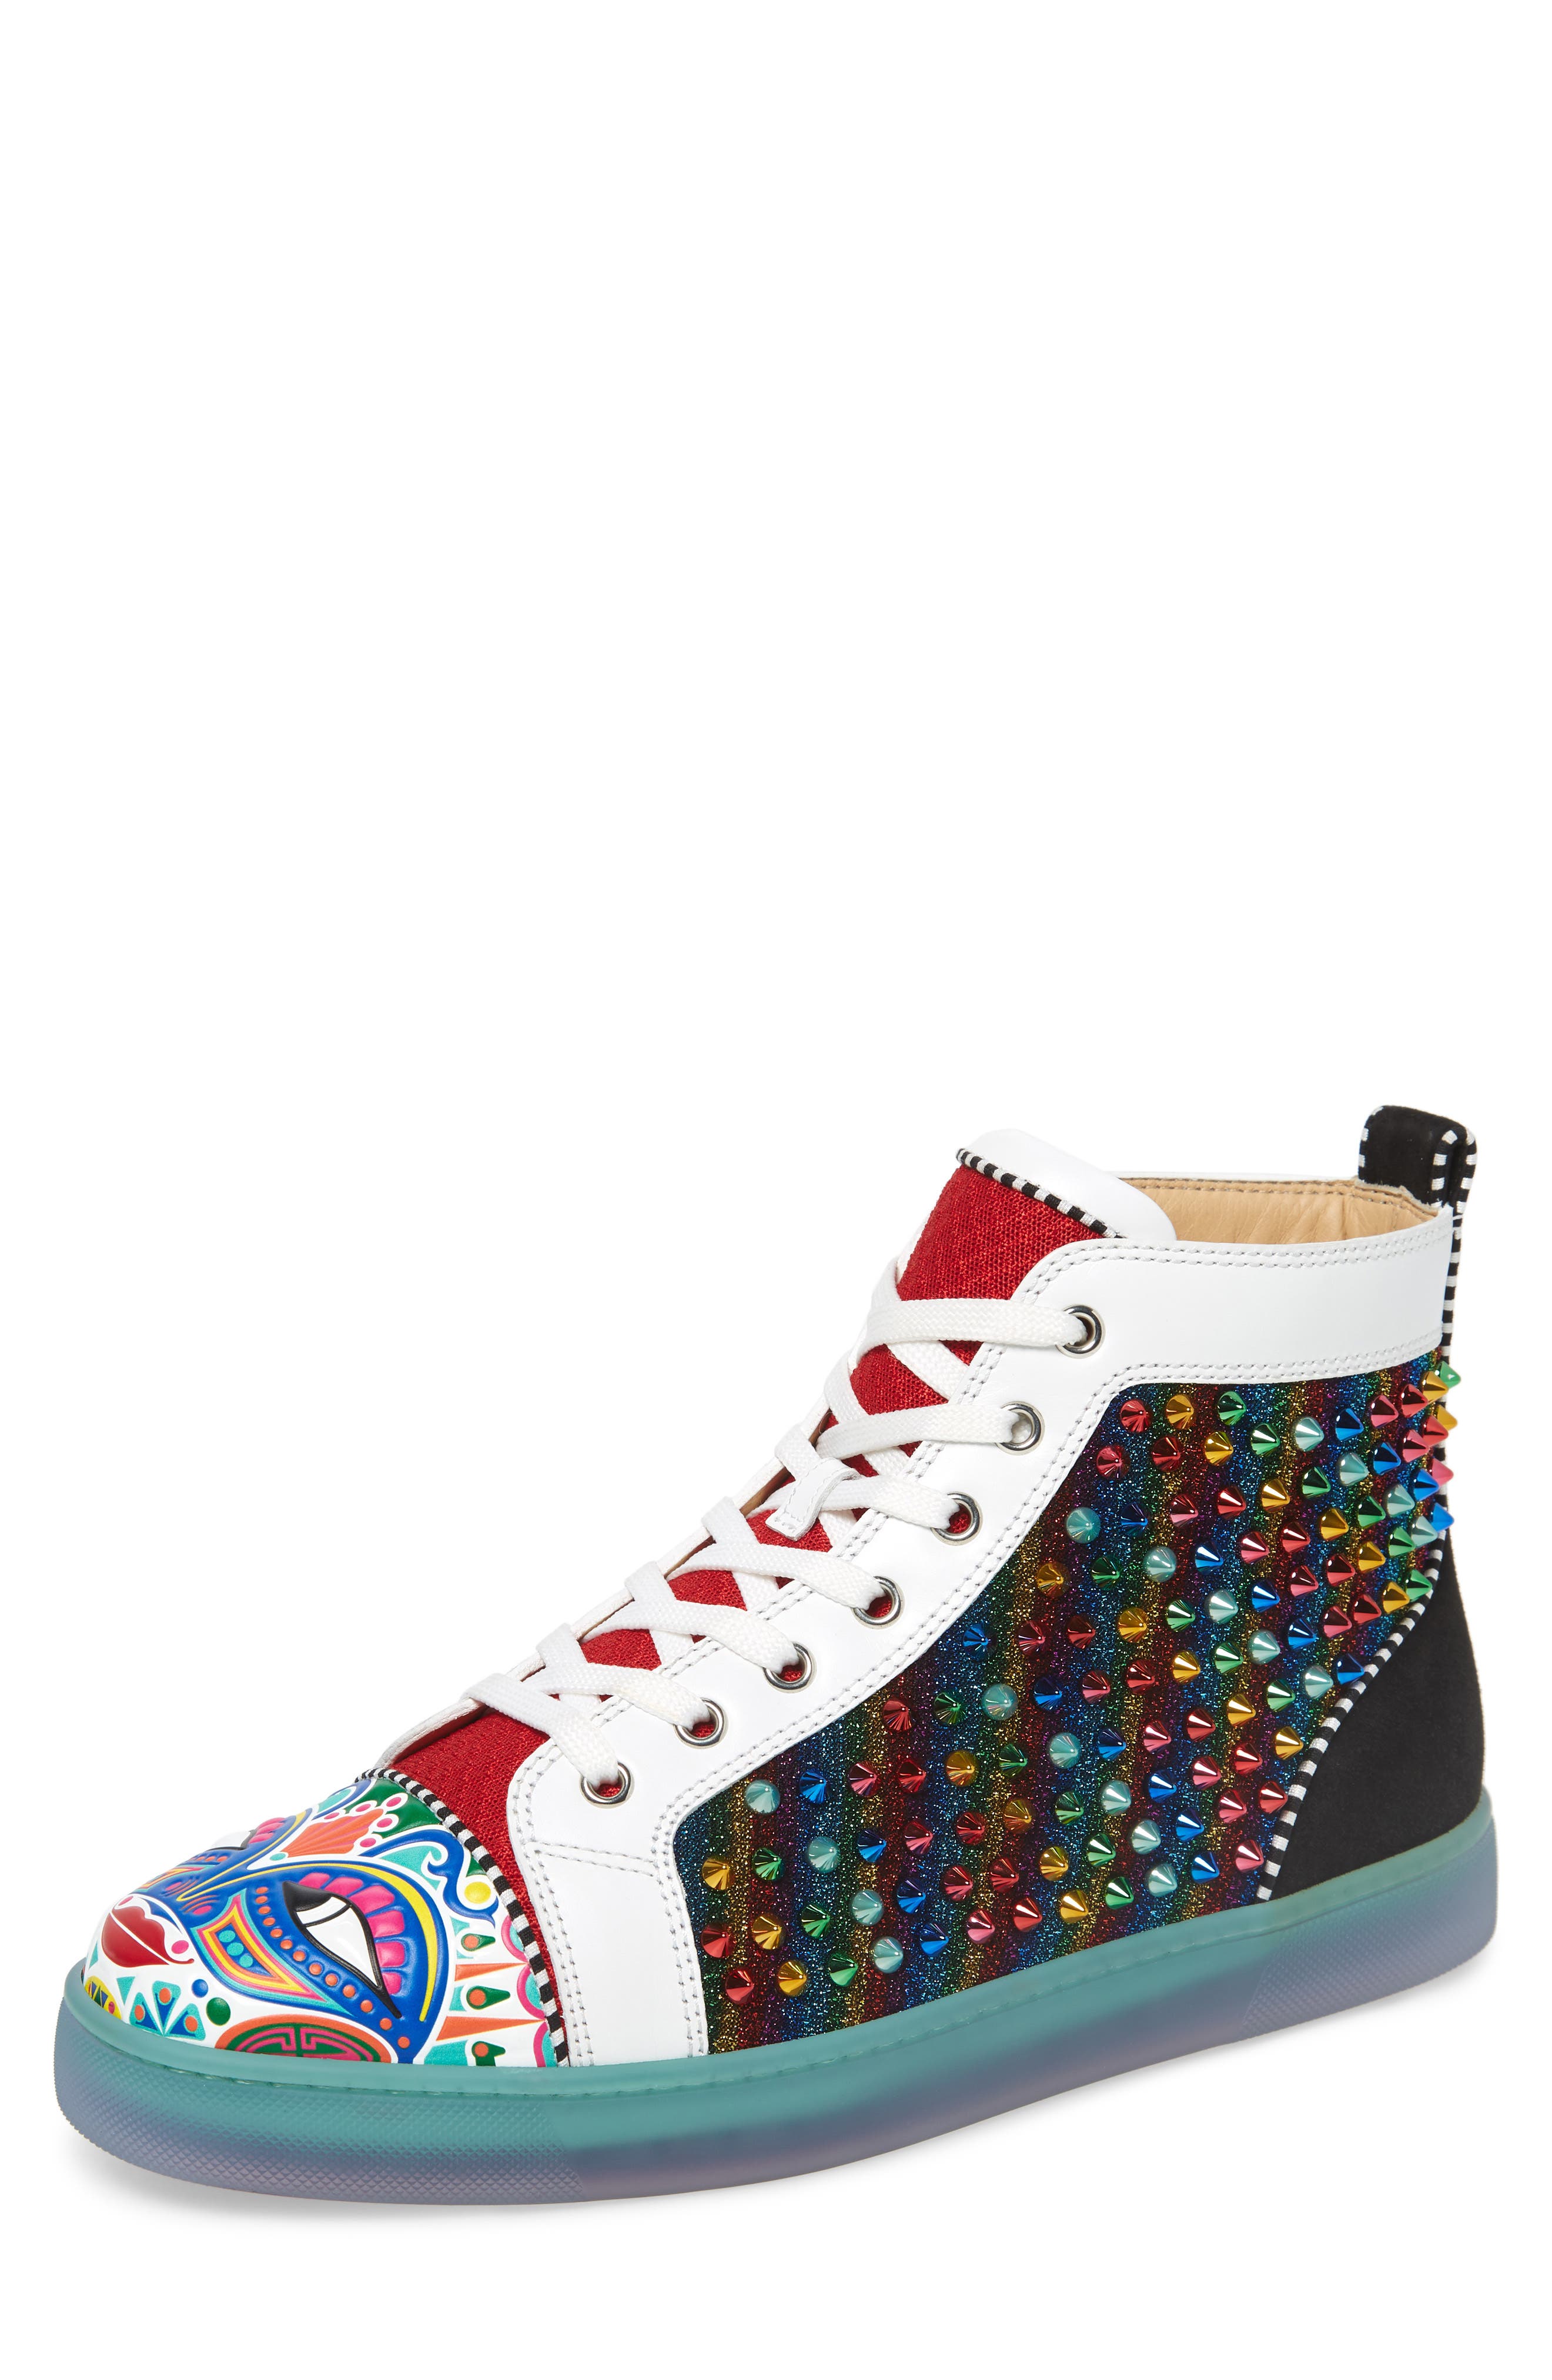 colorful christian louboutin shoes